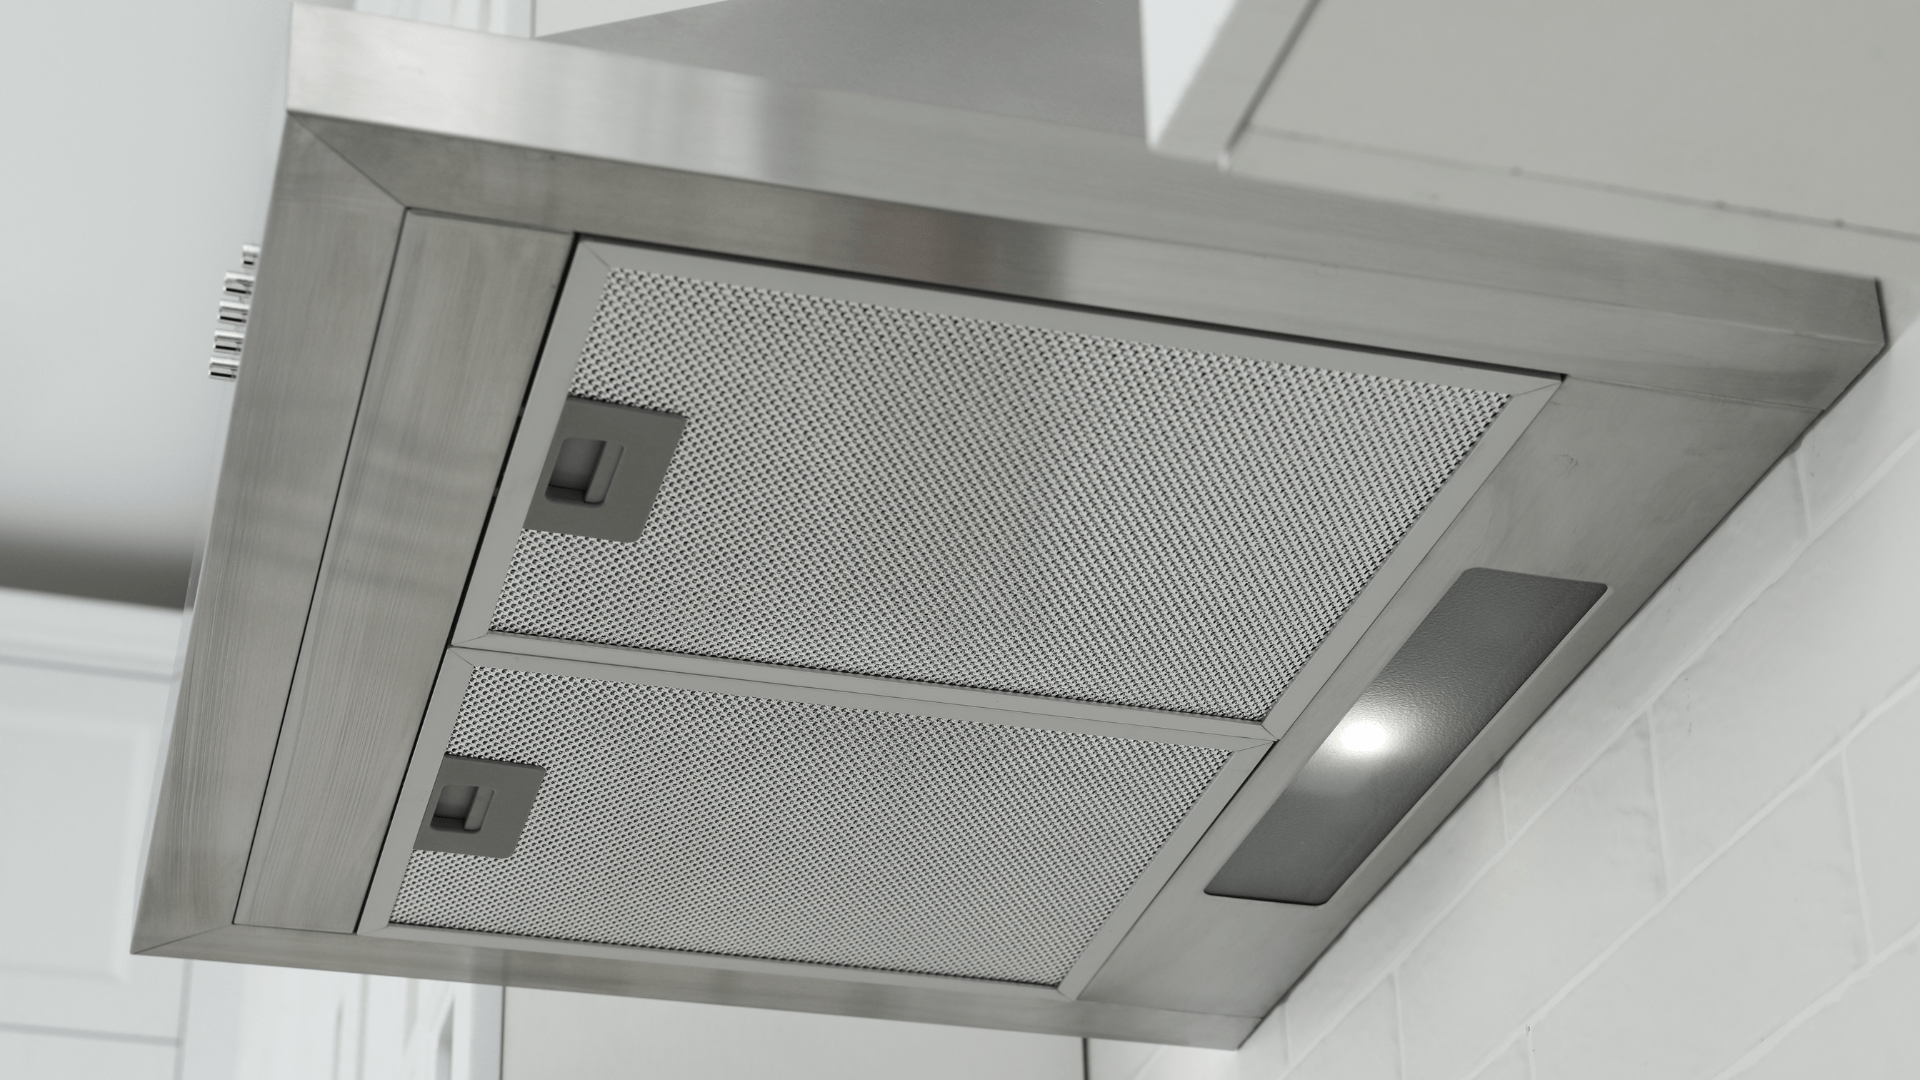 Why Aren’t My Range Vent Hood’s Fan And Lights Working?